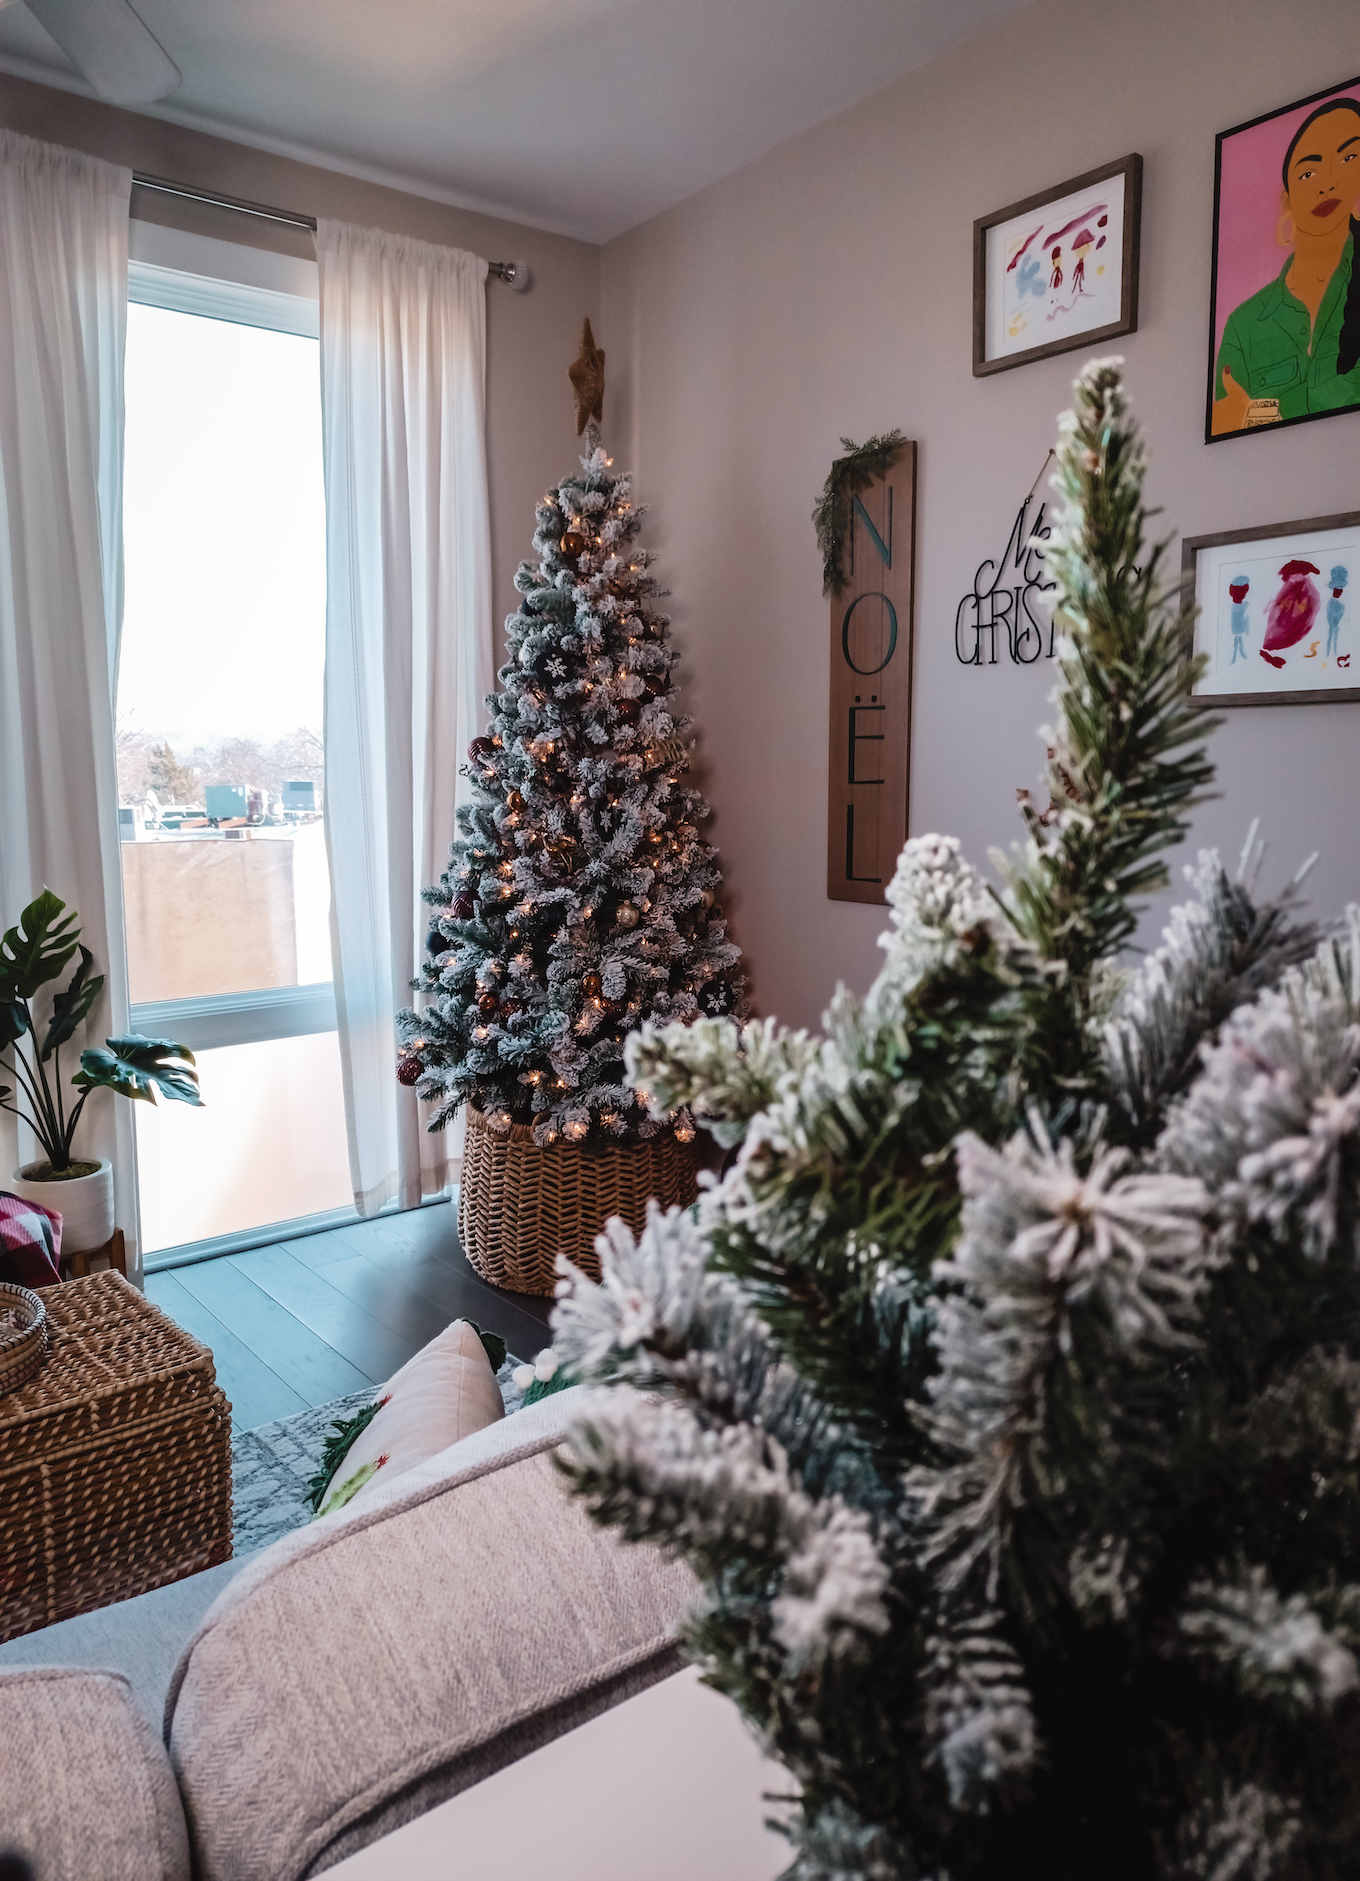 Photo shows a flocked Christmas tree in the distance in a living room. Adding holiday decor is a quick way to make a small apartment feel Christmasy.